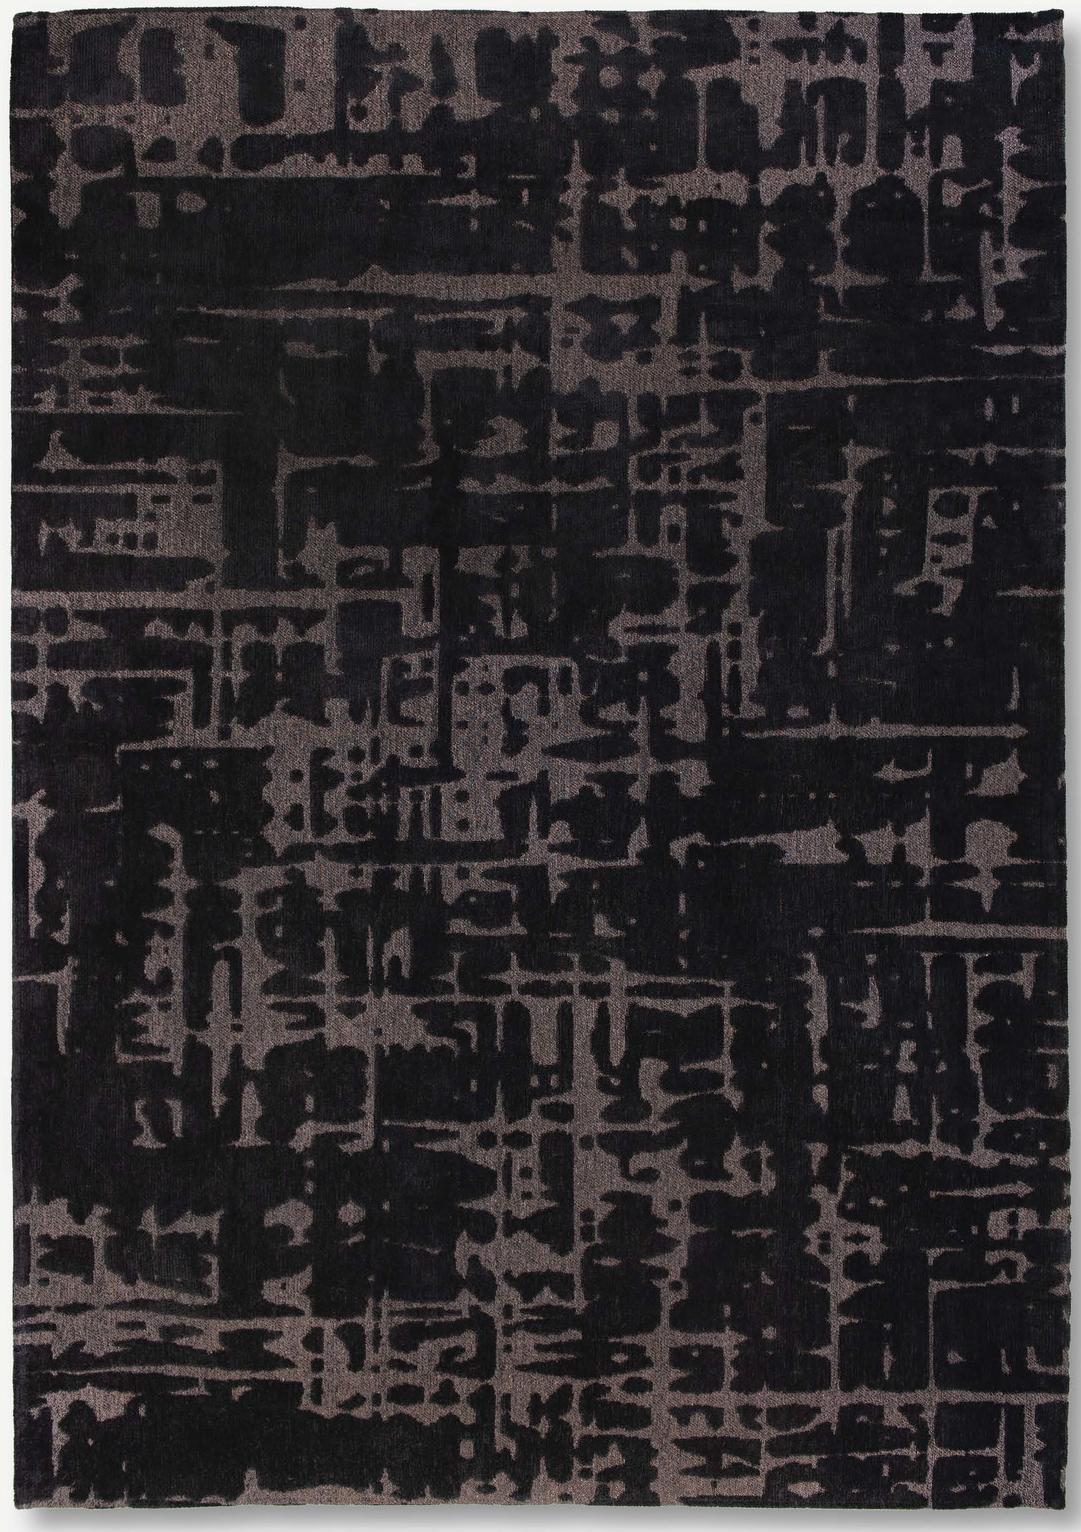 Abstract Black Belgian Rug ☞ Size: 2' 7" x 5' (80 x 150 cm)